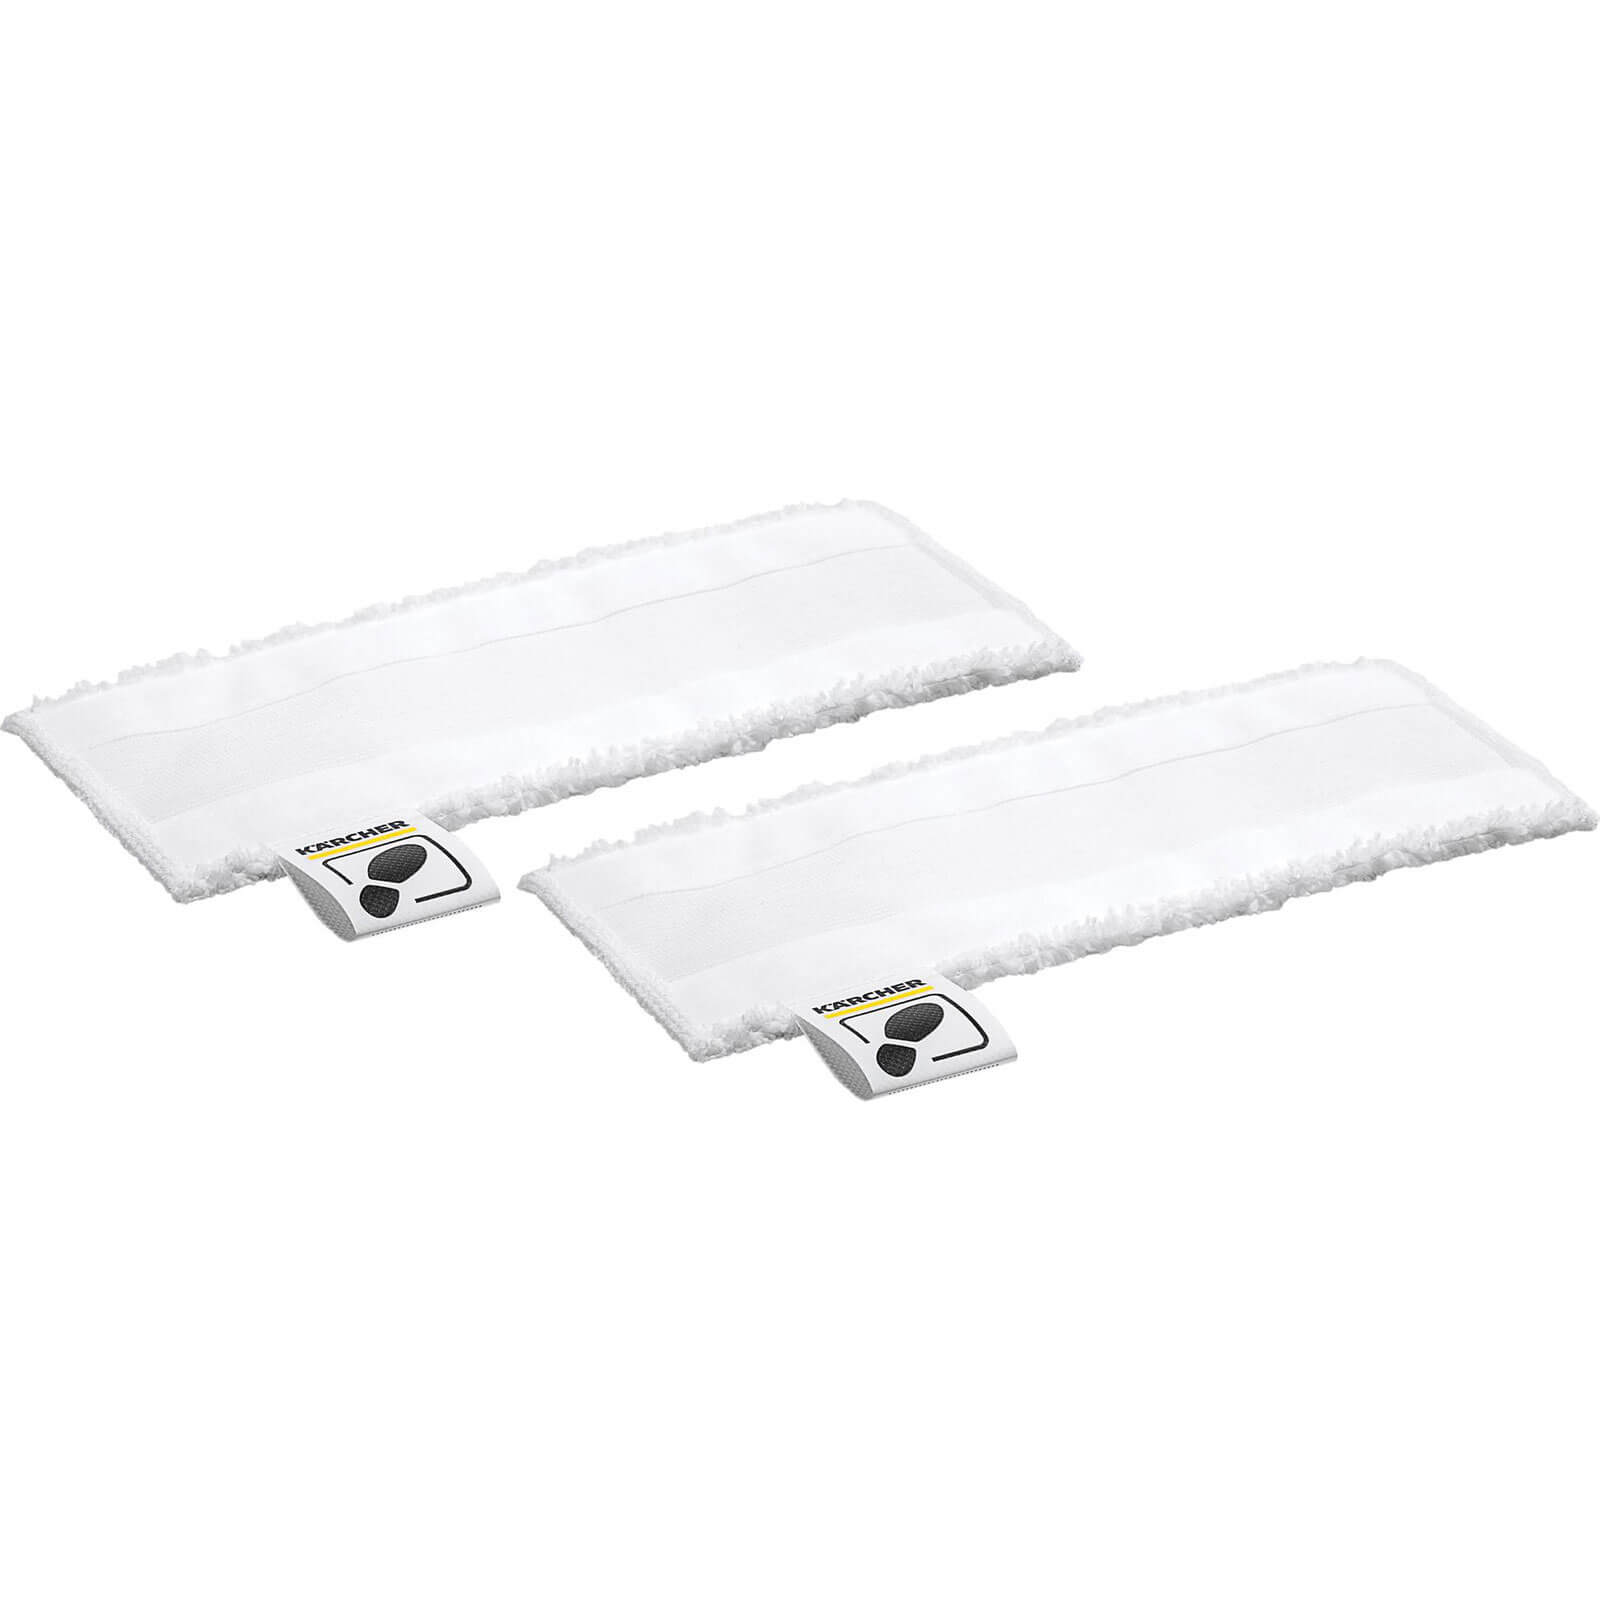 Image of Karcher Floor Tool Microfibre Cloths for SC EASYFIX Steam Cleaners Pack of 2